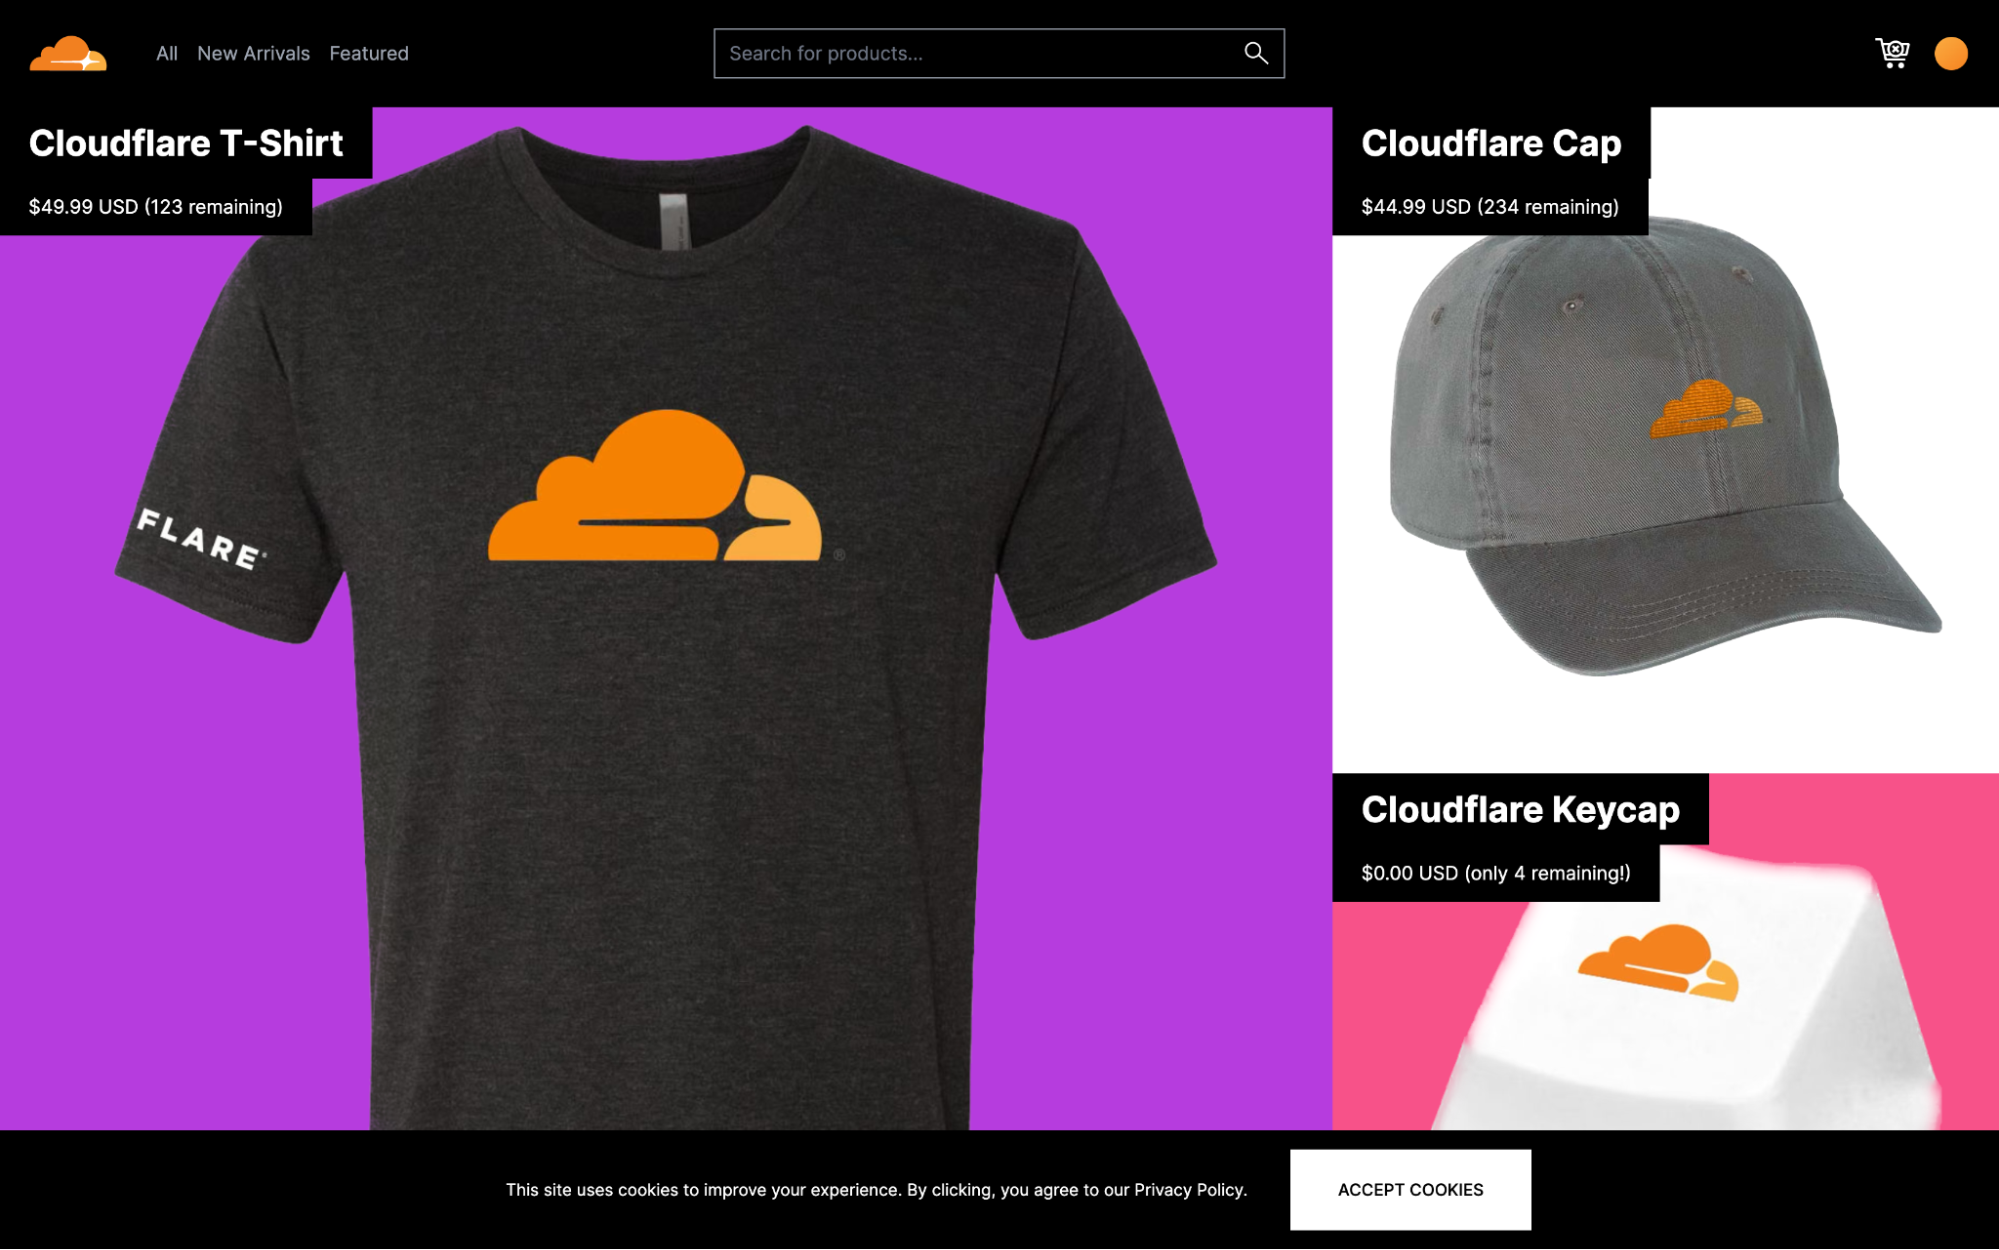 A screenshot of the landing page of a demo Cloudflare e-commerce website selling a t-shirt, cap and keycap. Each item is branded with the Cloudflare logo, and has a price and "stock remaining" number.